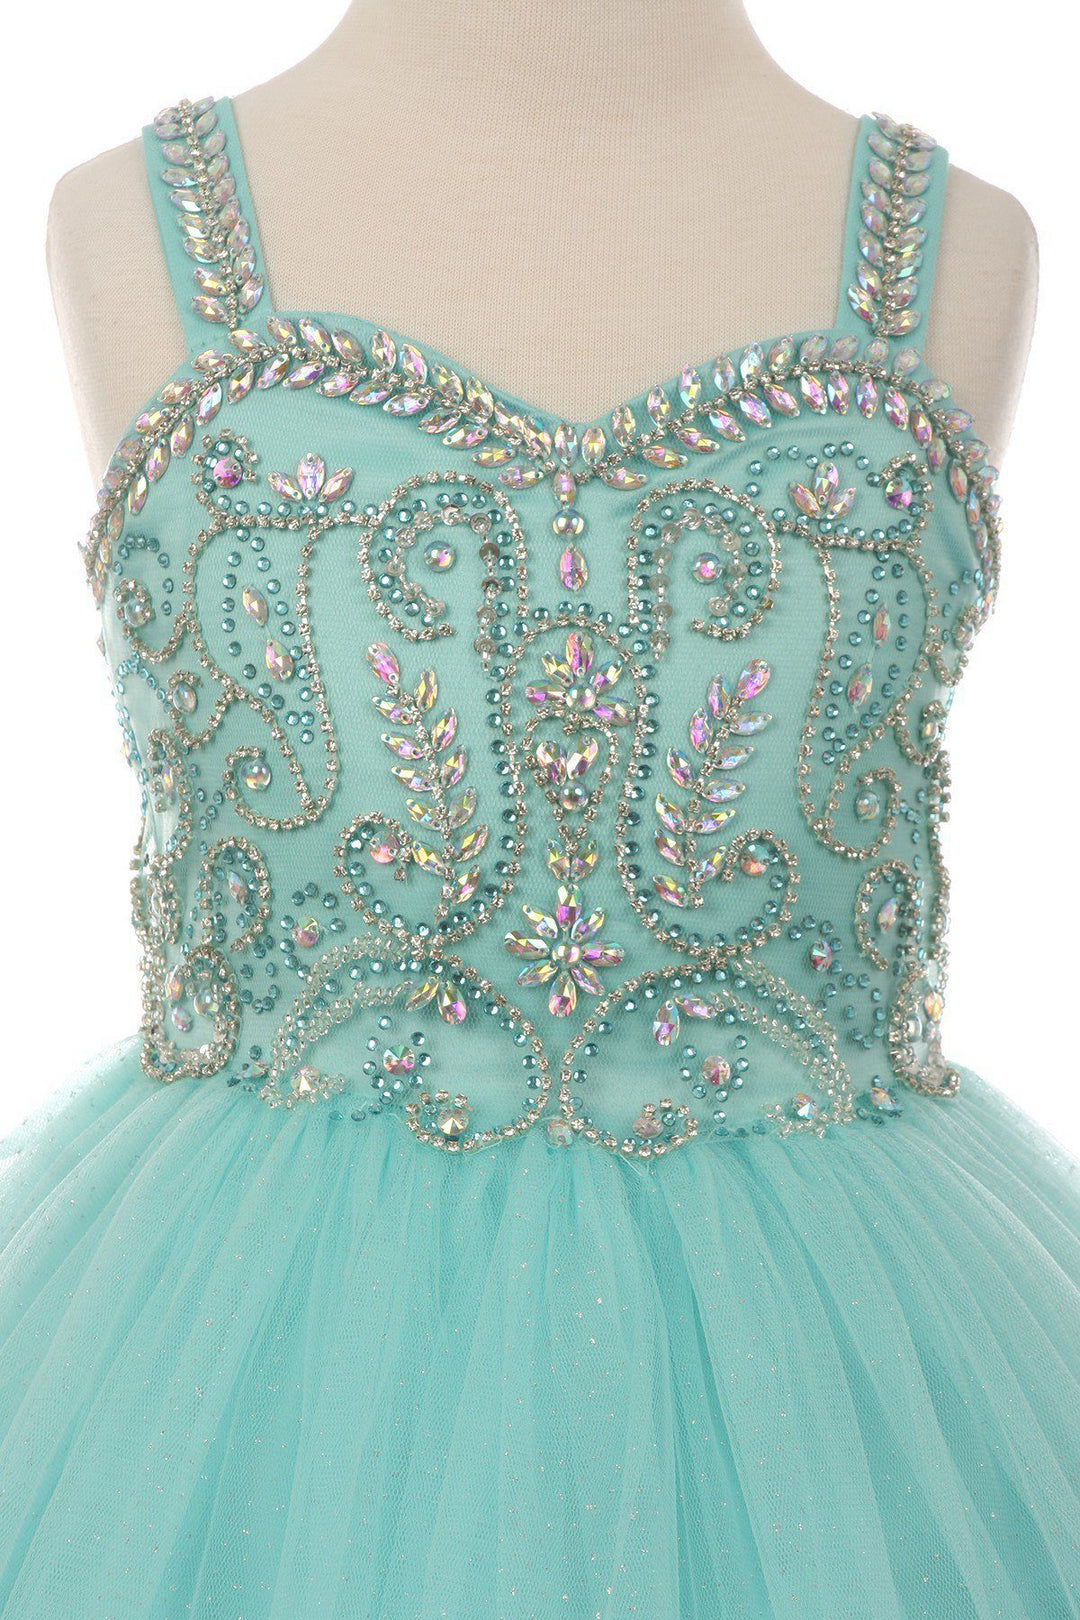 Beaded Girls Long Sweetheart Dress with Bolero by Cinderella Couture 5038-Girls Formal Dresses-ABC Fashion